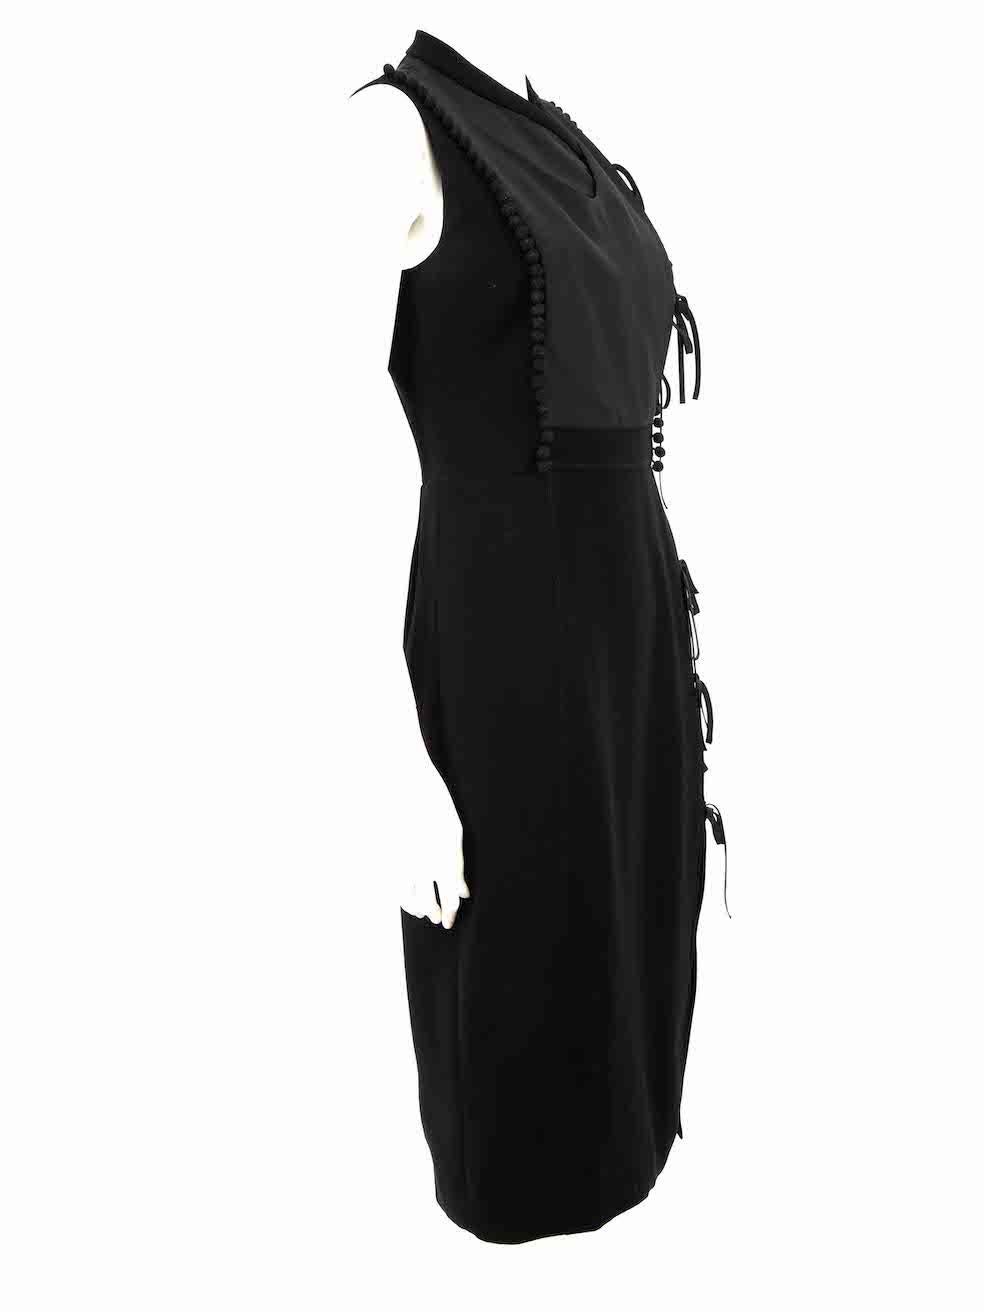 CONDITION is Very good. Hardly any visible wear to dress is evident on this used Altuzarra designer resale item.
 
 
 
 Details
 
 
 Black
 
 Polyester
 
 Dress
 
 Round neck
 
 Hook and tied fastening
 
 Sleeveless
 
 Pompom trim
 
 Midi
 
 
 
 
 
